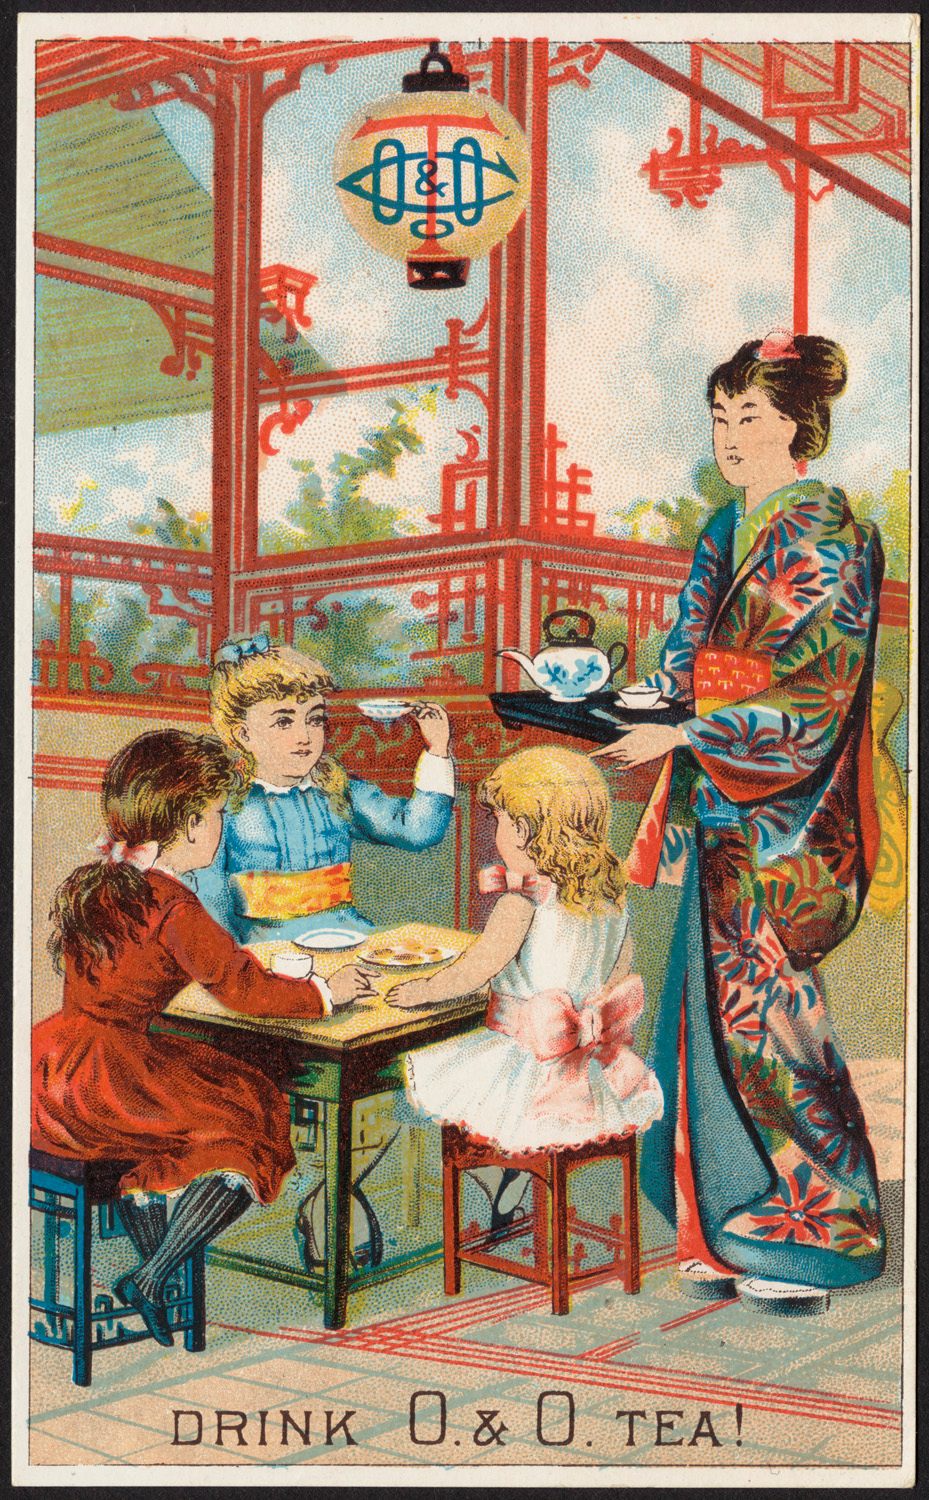 A late 19th century advertisement for tea importer O. & O. ("Occidental and Oriental") depicts a Japanese woman serving tea to white American children.